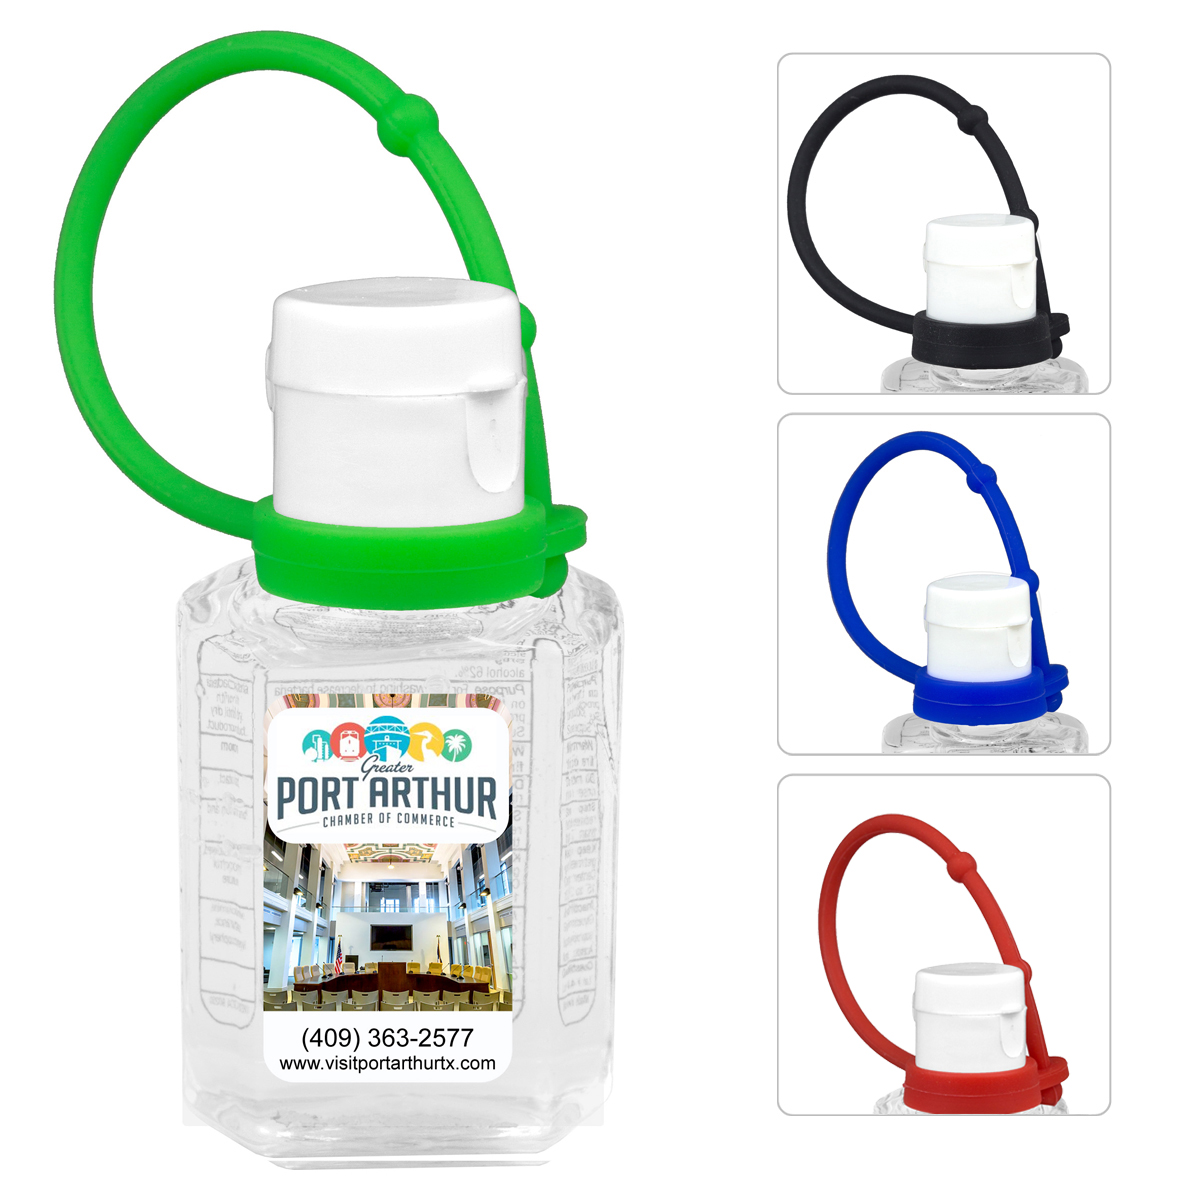 "SANPAL CONNECT" 1.0 oz Compact Hand Sanitizer Antibacterial Gel in Flip-Top Squeeze Bottle with Colorful Silicone Leash